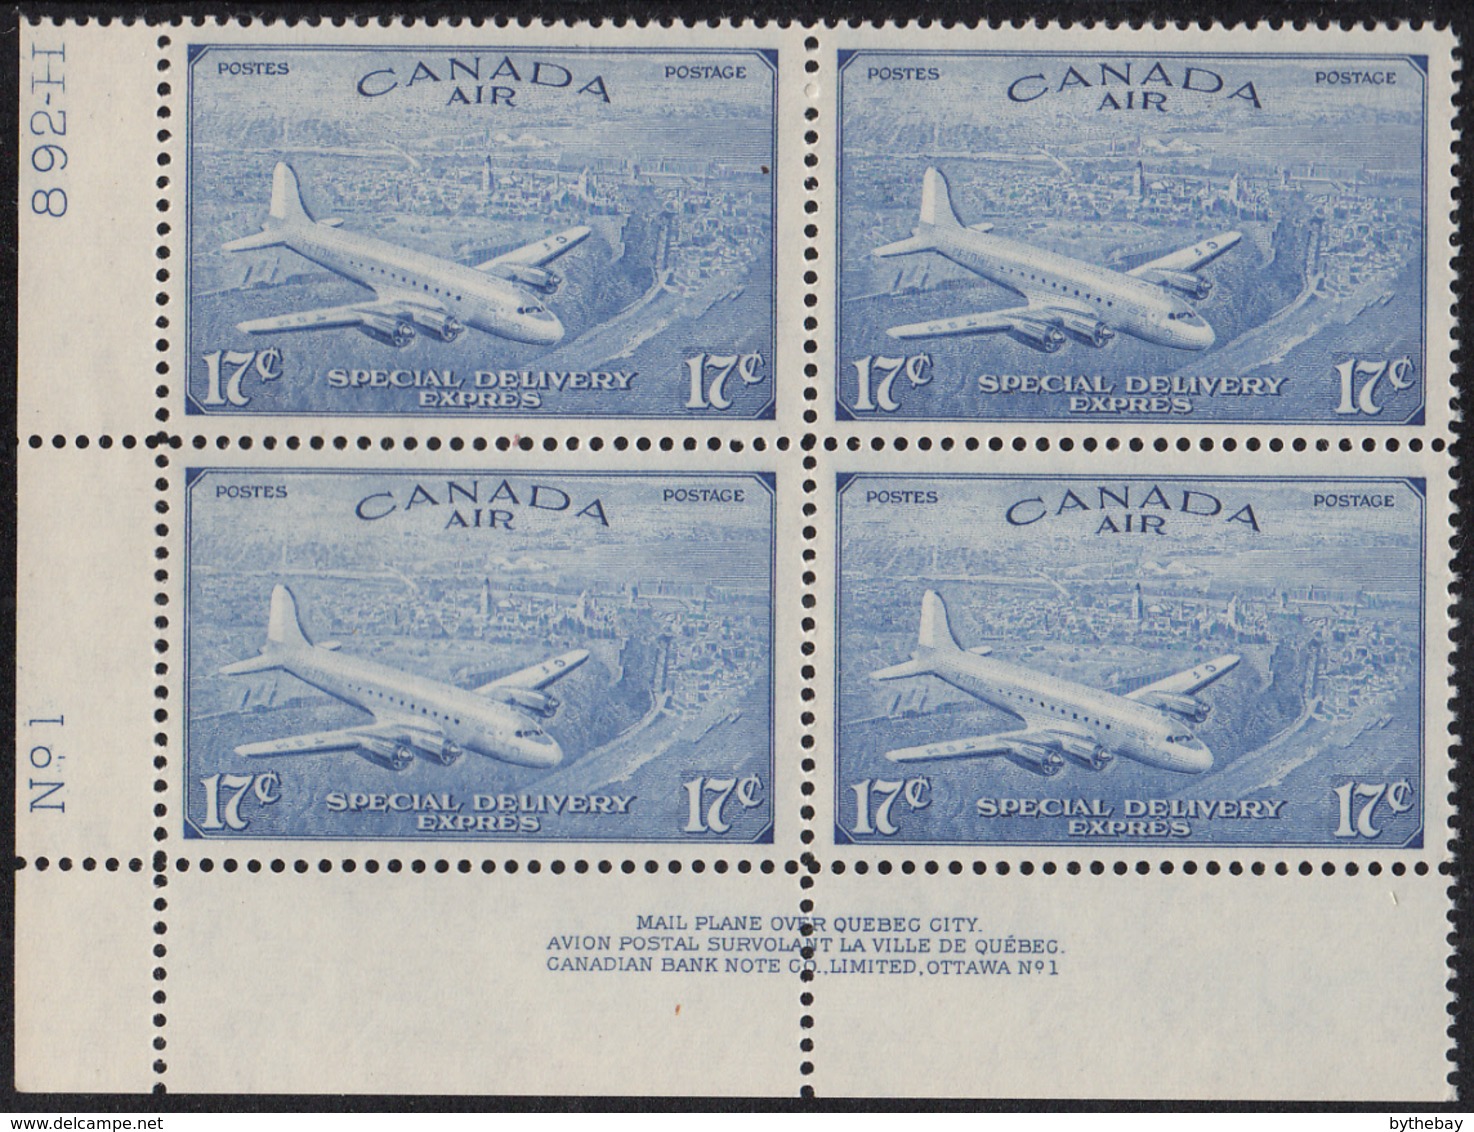 Canada 1946 MNH Sc CE3 17c D.C. 4-M Airplane Plate 1 Lower Left Plate Block - Airmail: Semi-official